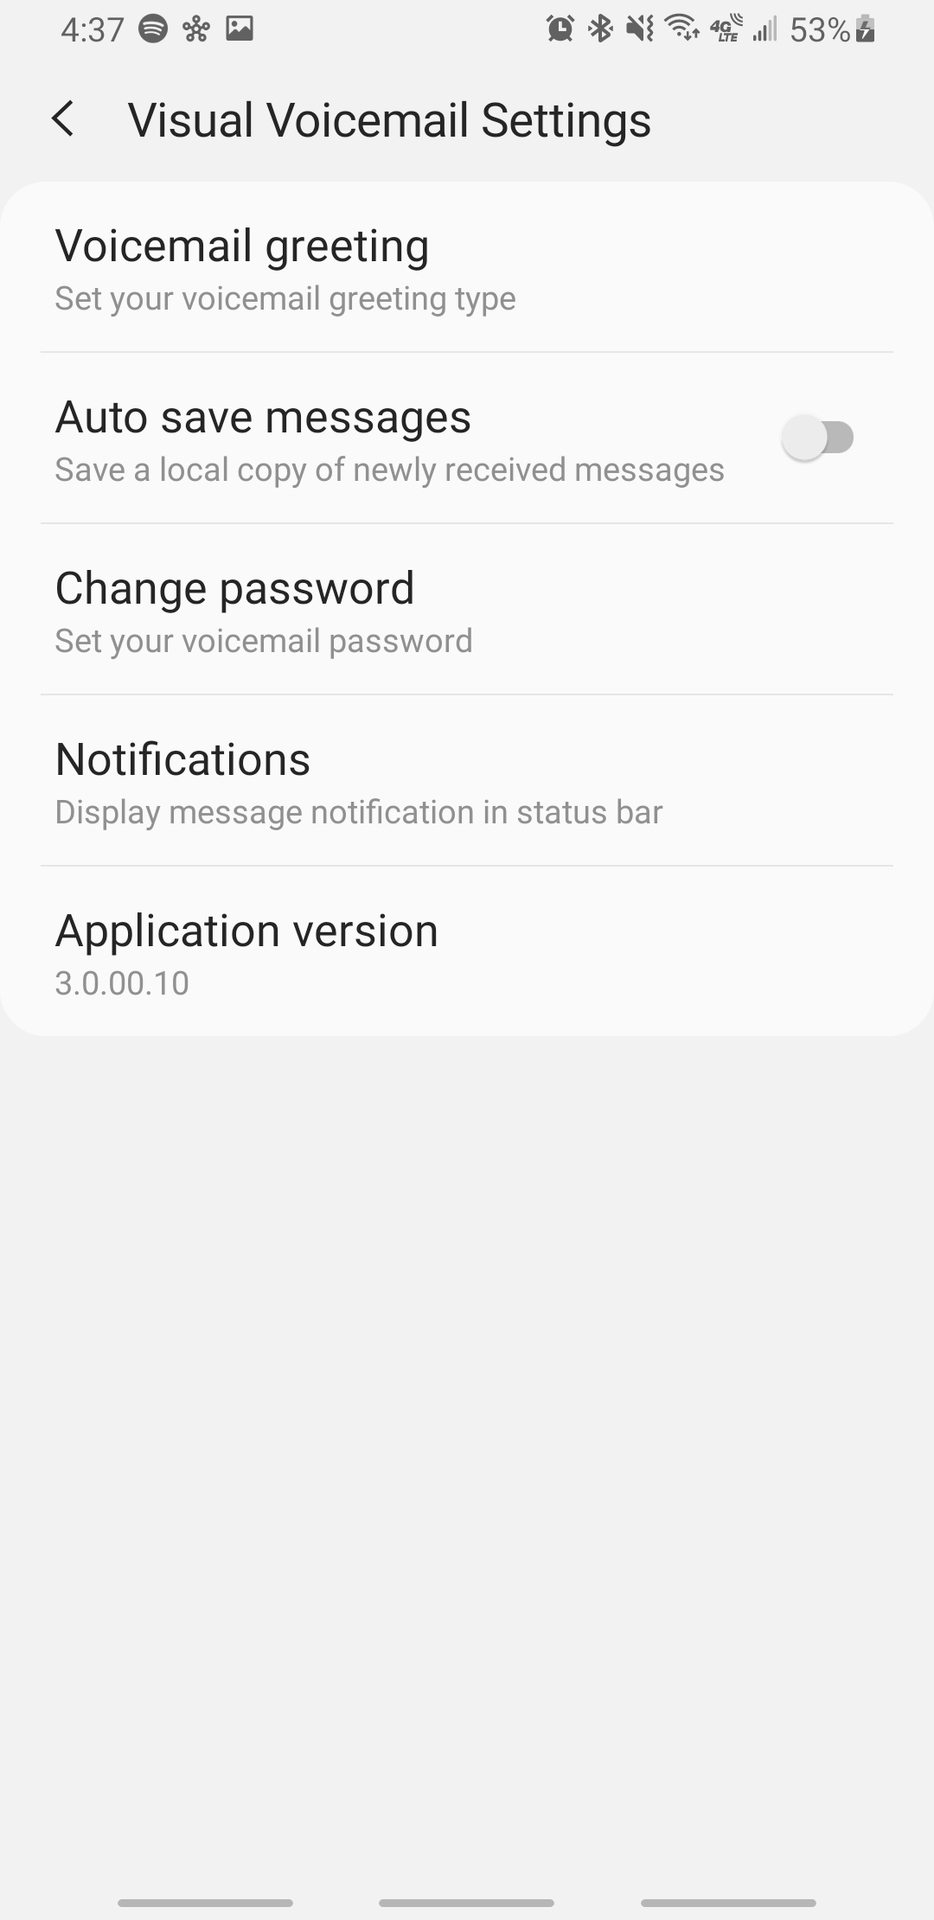 visual voicemail settings on android